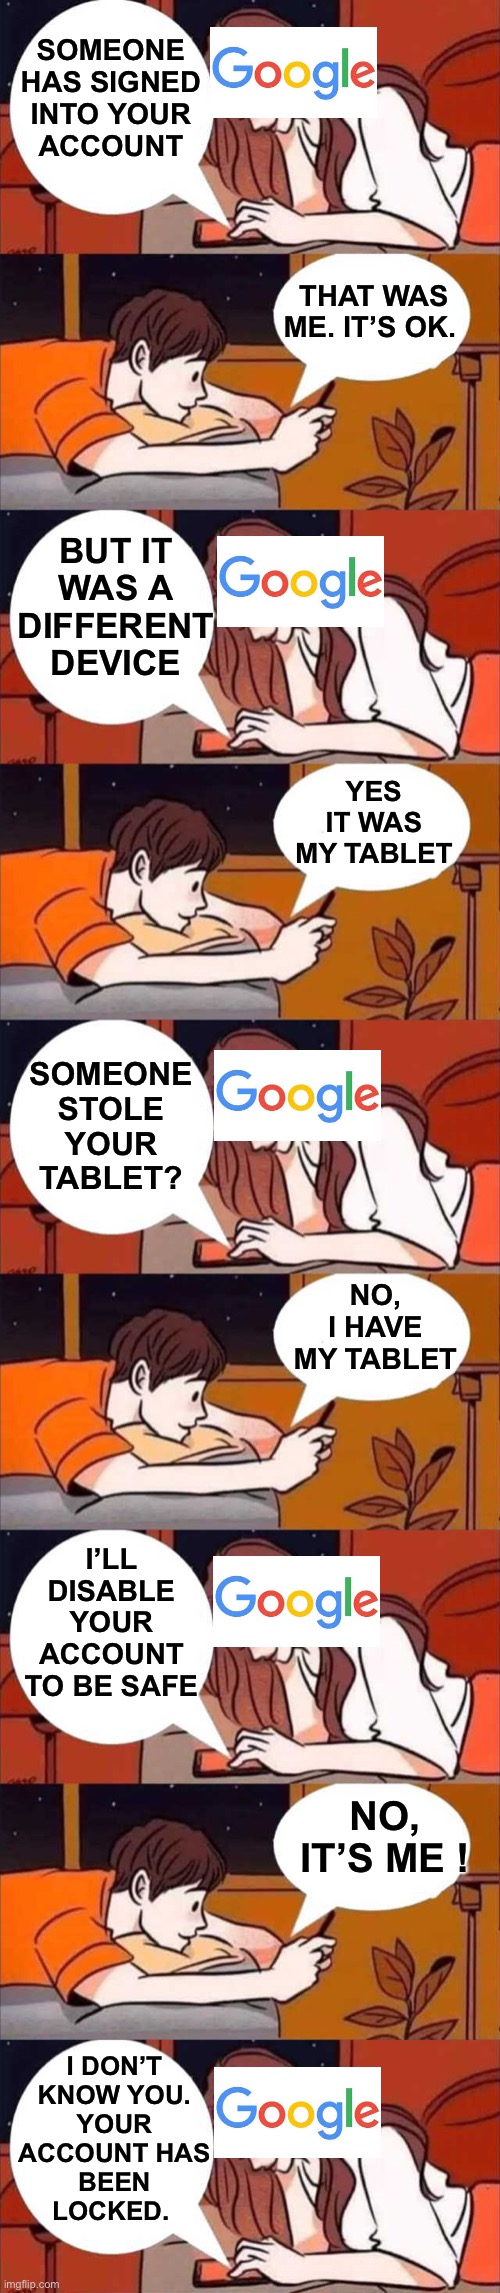 Almost everyday with Google and Gmail | SOMEONE
HAS SIGNED
INTO YOUR
ACCOUNT; THAT WAS ME. IT’S OK. BUT IT WAS A DIFFERENT DEVICE; YES IT WAS MY TABLET; SOMEONE STOLE YOUR TABLET? NO, I HAVE MY TABLET; I’LL DISABLE YOUR ACCOUNT TO BE SAFE; NO, IT’S ME ! I DON’T
KNOW YOU.
YOUR
ACCOUNT HAS
BEEN
LOCKED. | image tagged in boy and girl texting,google,gmail,conversation,account,blocked | made w/ Imgflip meme maker